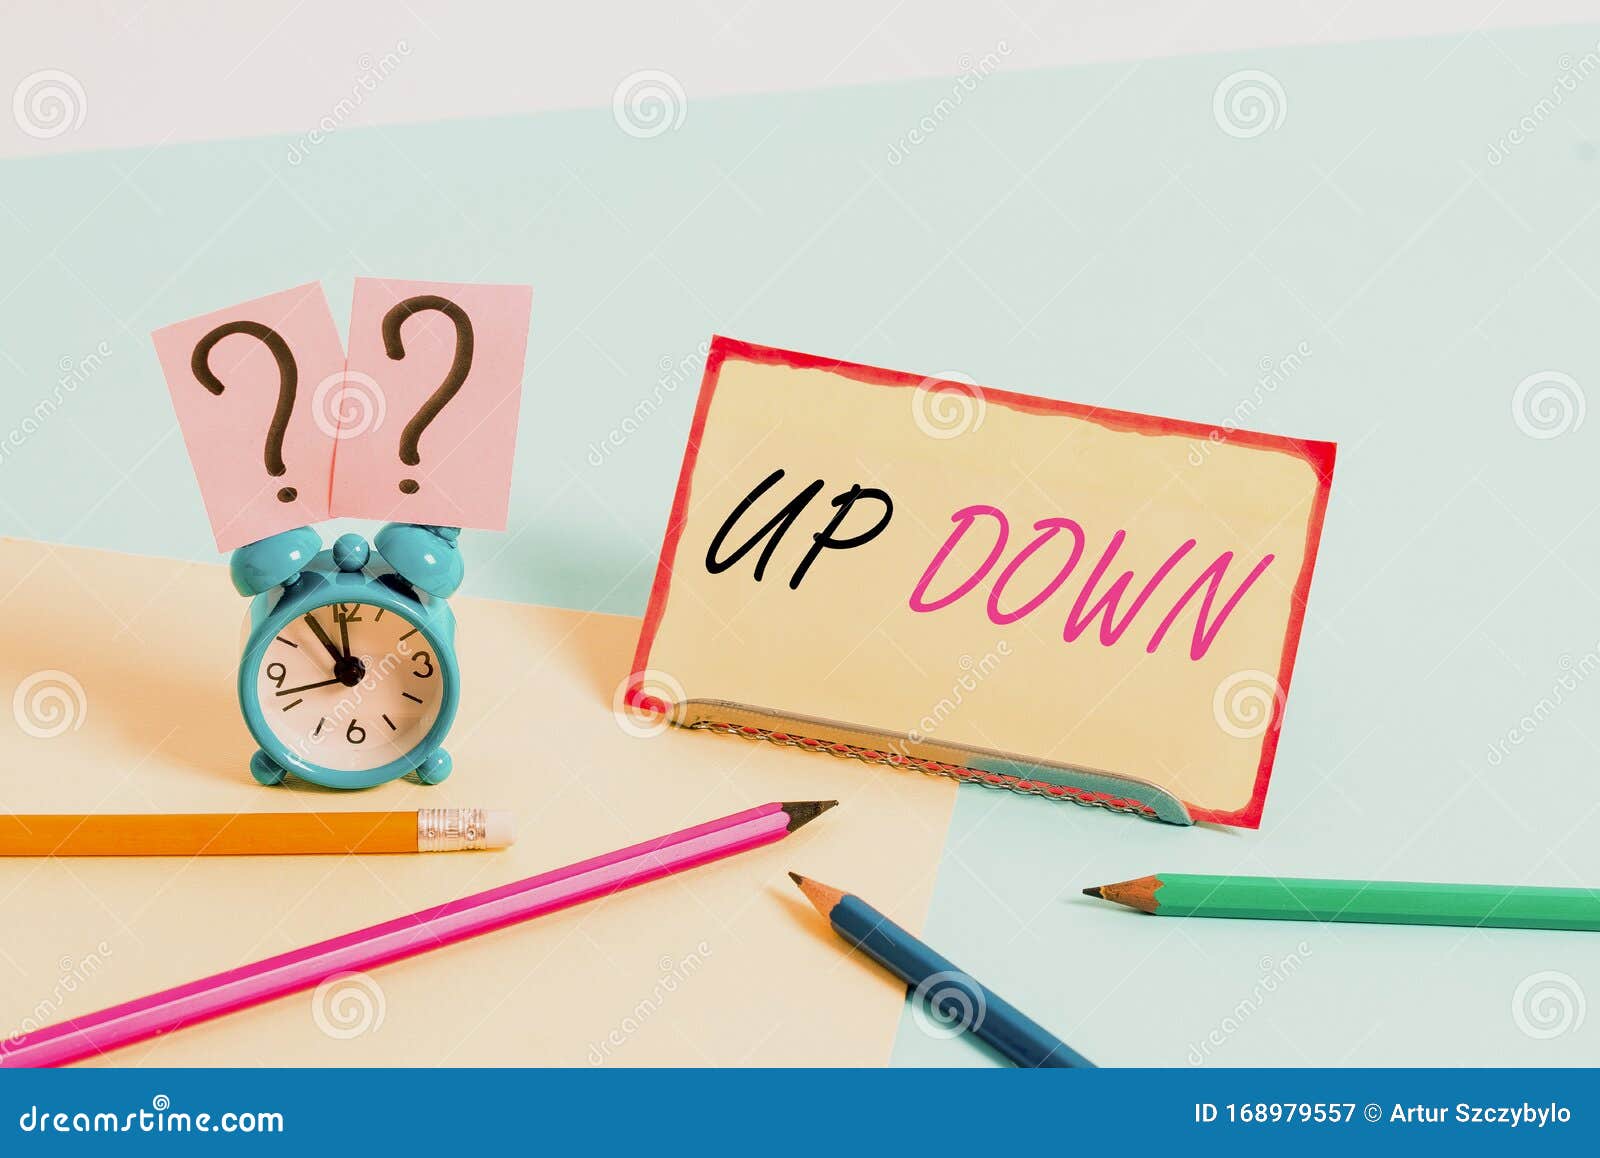 https://thumbs.dreamstime.com/z/handwriting-text-up-down-conceptual-photo-to-look-to-feel-updown-look-to-feel-absolutely-screwed-up-mini-size-alarm-clock-168979557.jpg